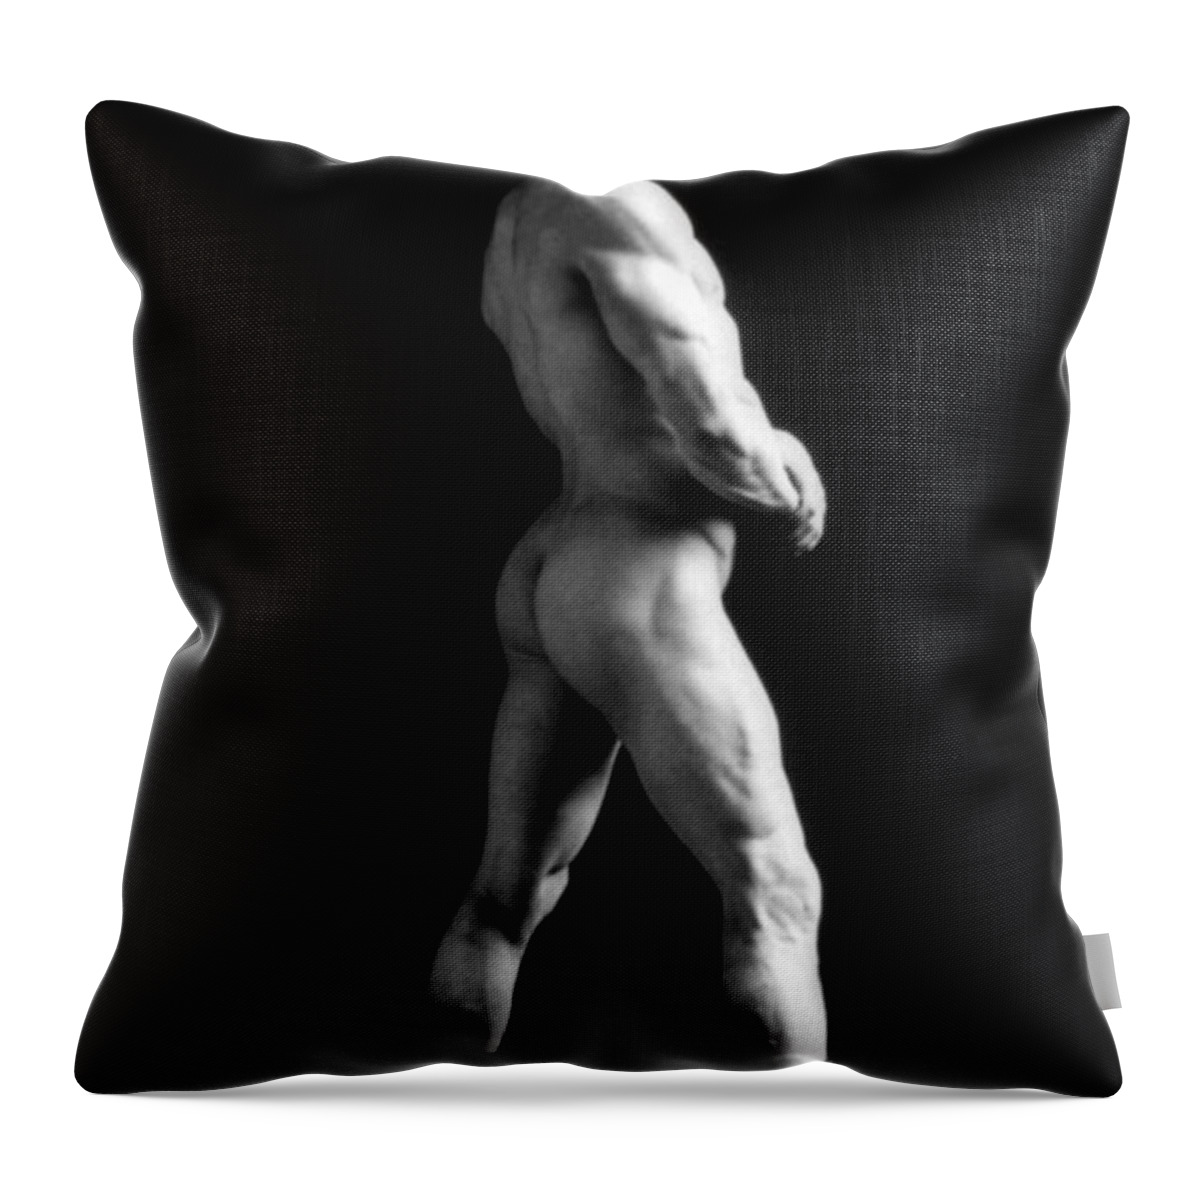 Erotica Throw Pillow featuring the photograph Eugen Sandow, Father Of Modern #4 by Science Source